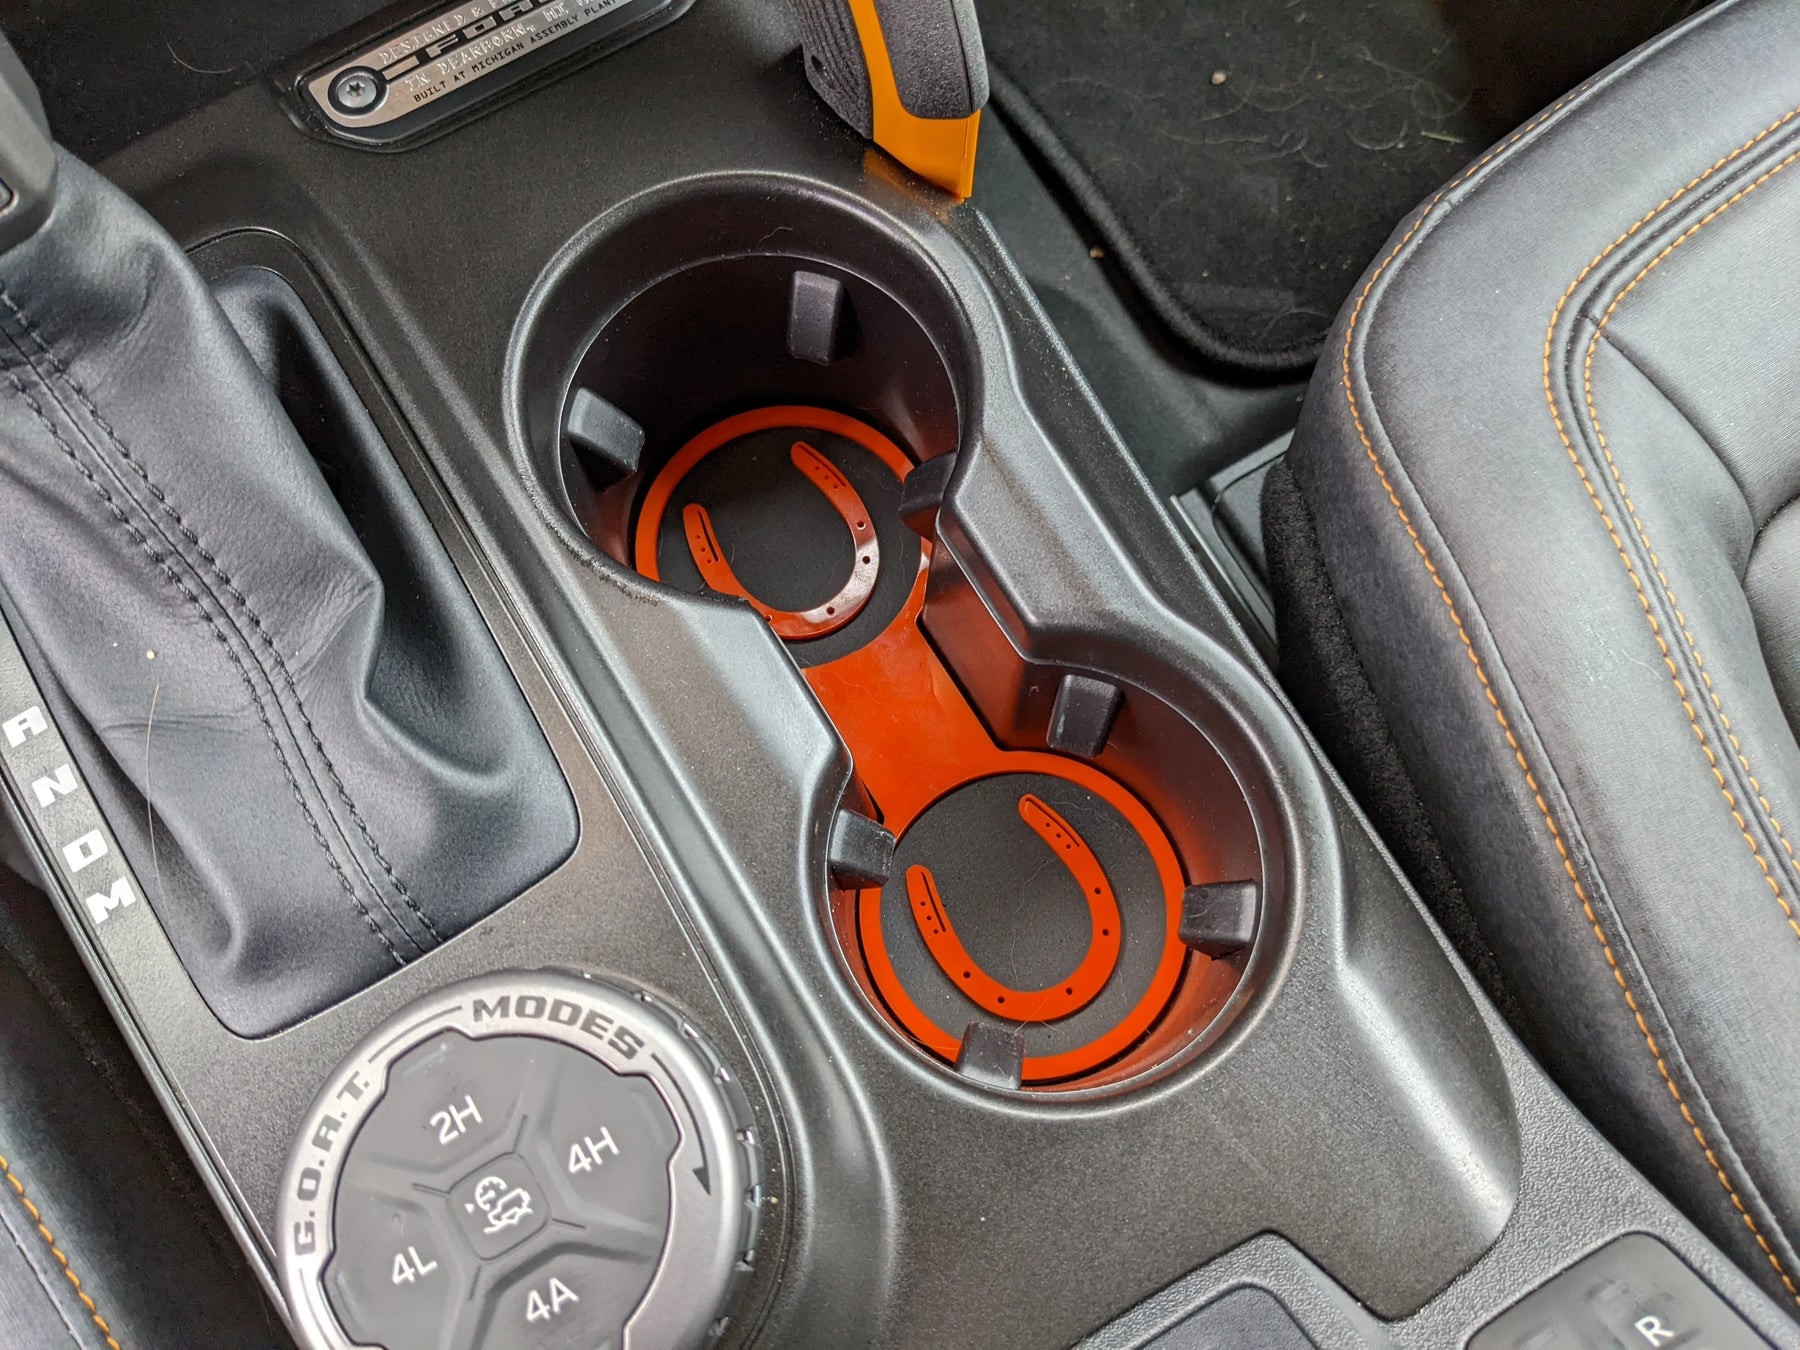 Horseshoe Cupholder Insert - Fits 2021+ Bronco® - Multiple Colors Available